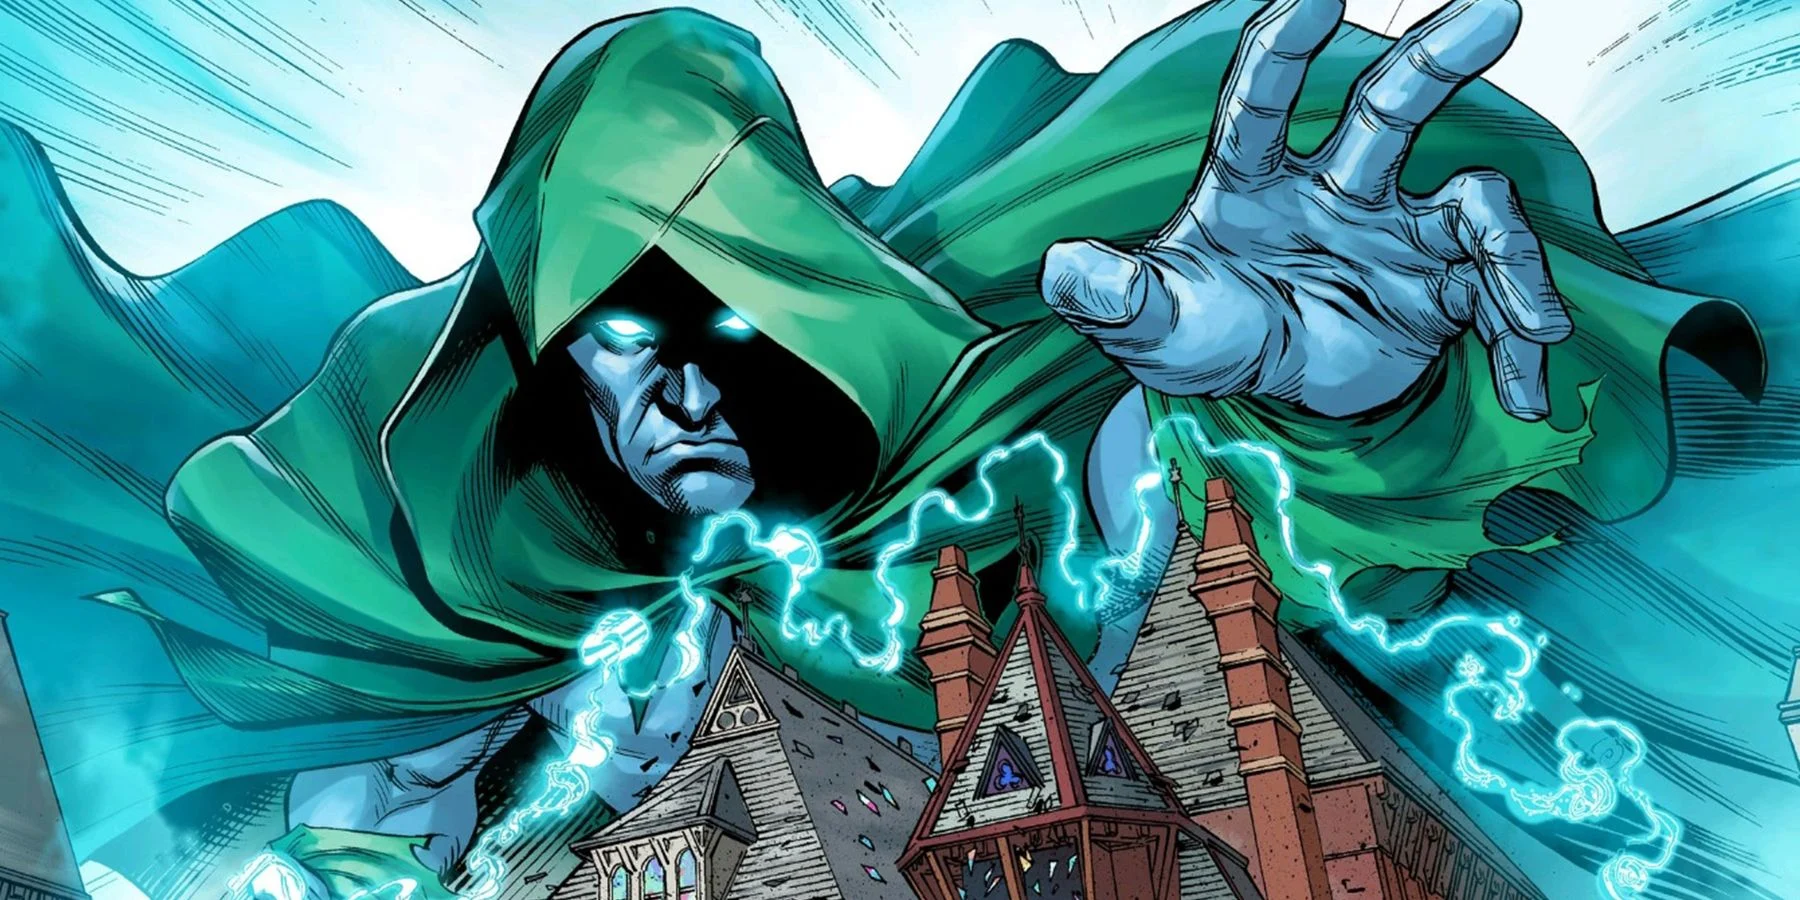 What Makes The Spectre One of DC’s Most Powerful Heroes